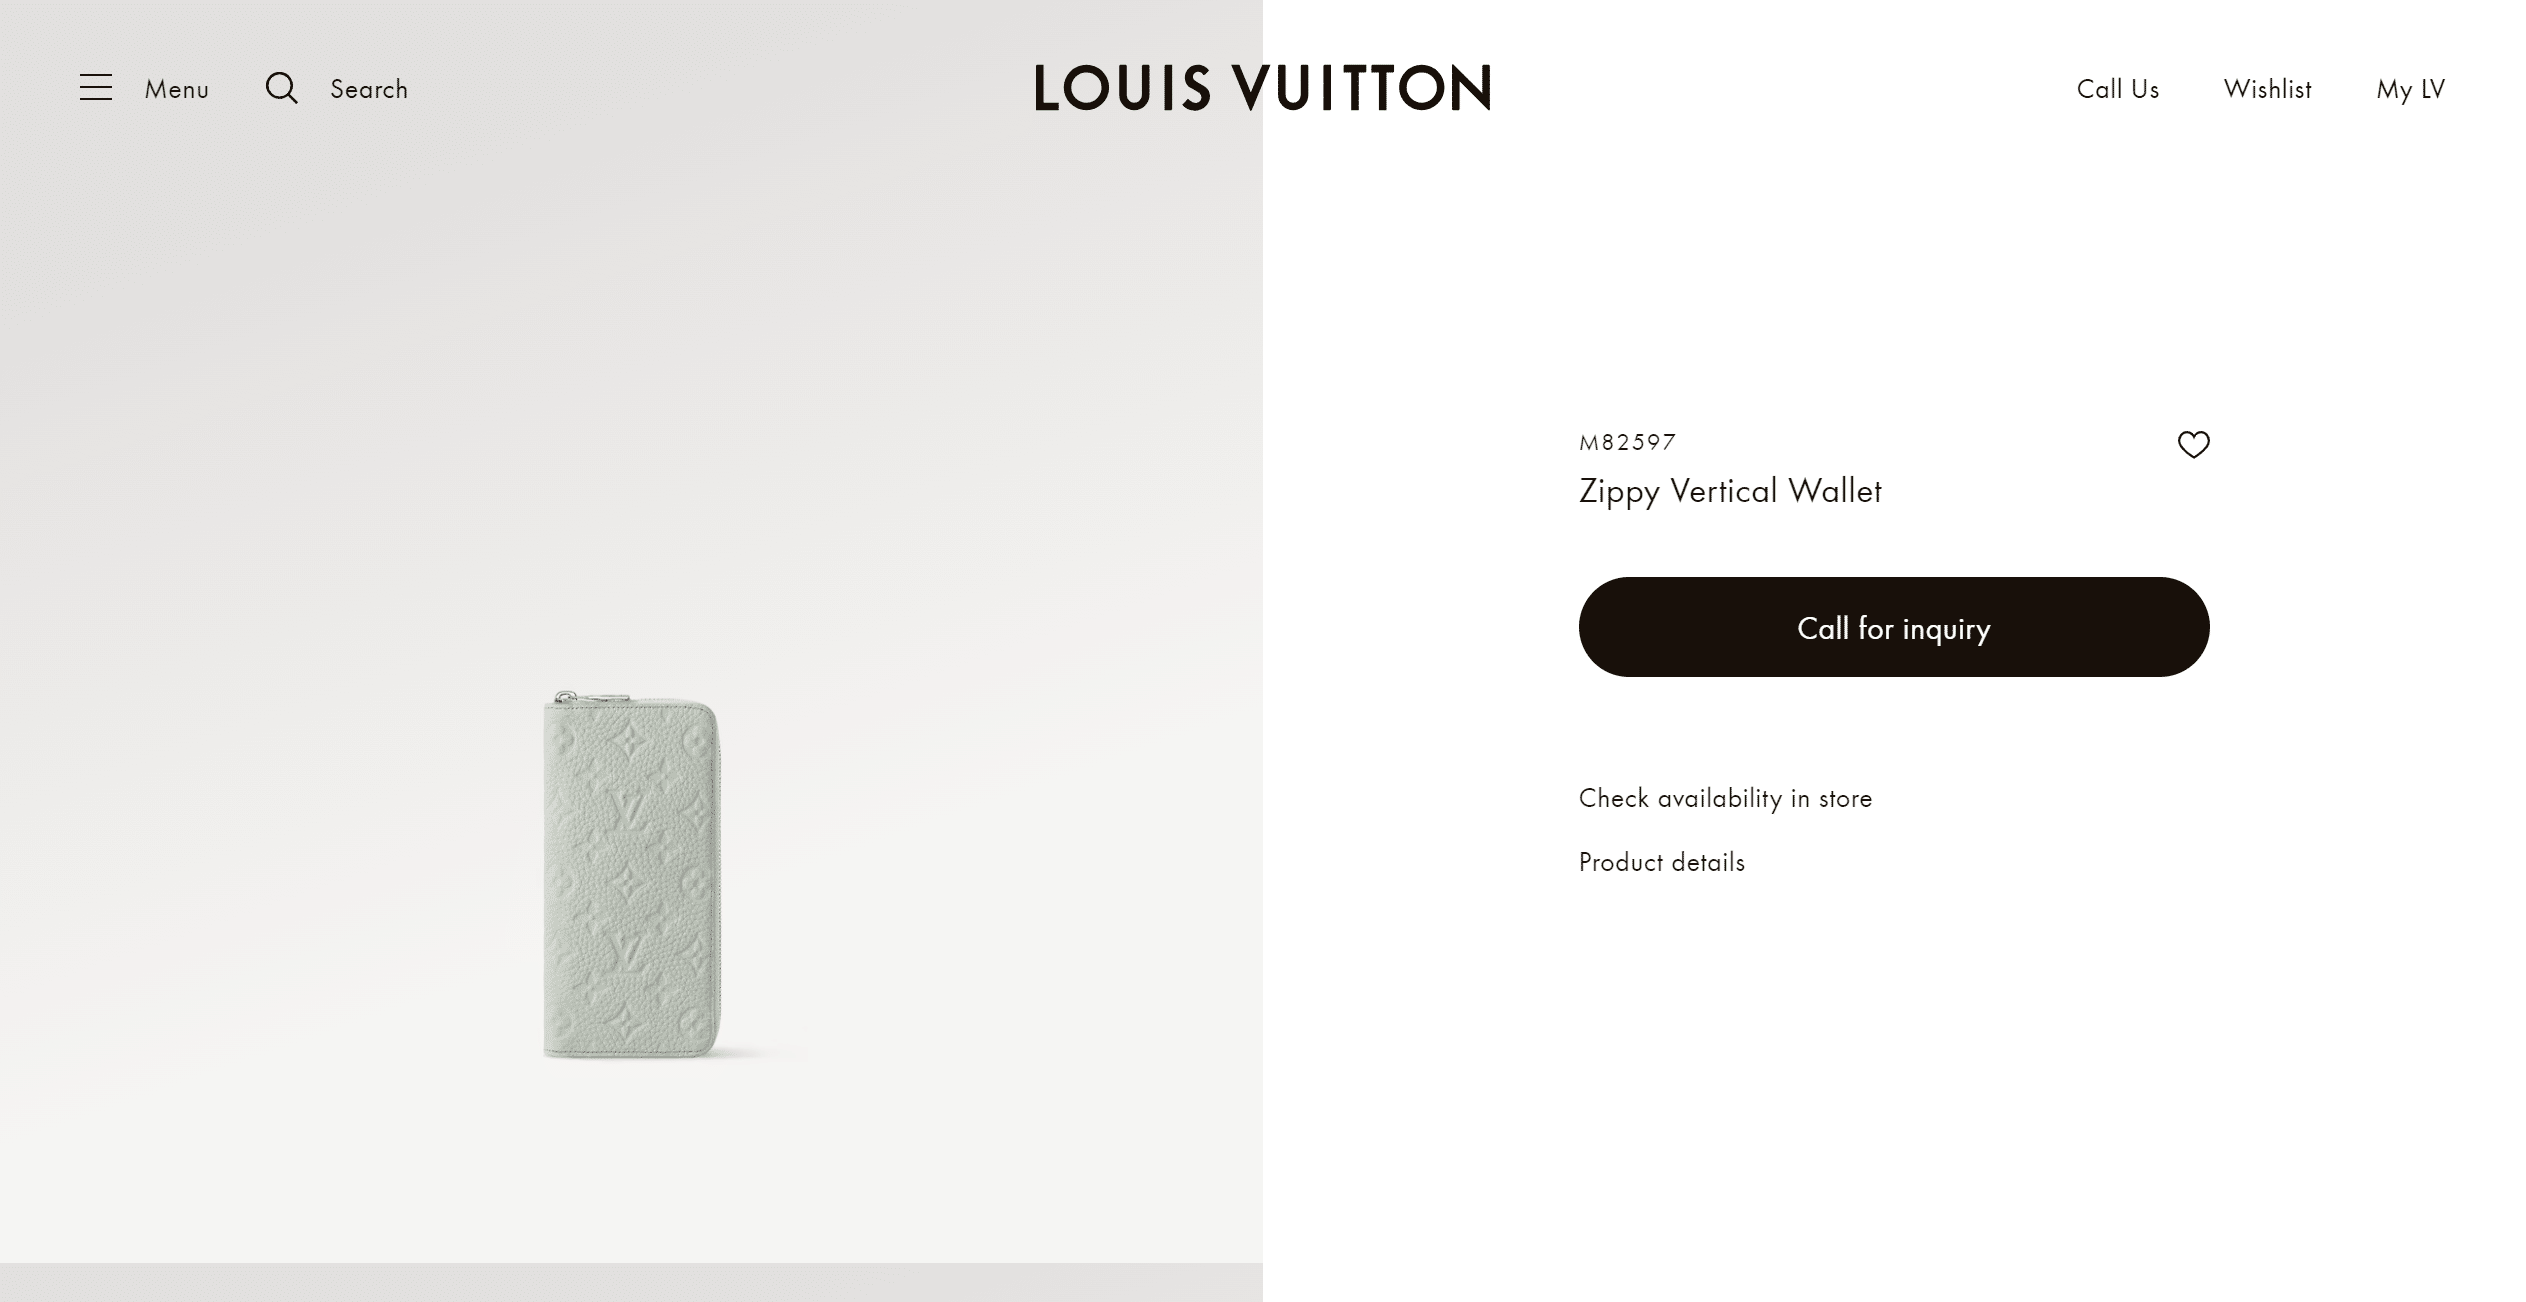 Zippy-Vertical-Wallet-Monogram-Taurillon-Leather-Wallets-and-Small-Leather-Goods-LOUIS-VUITTON.png